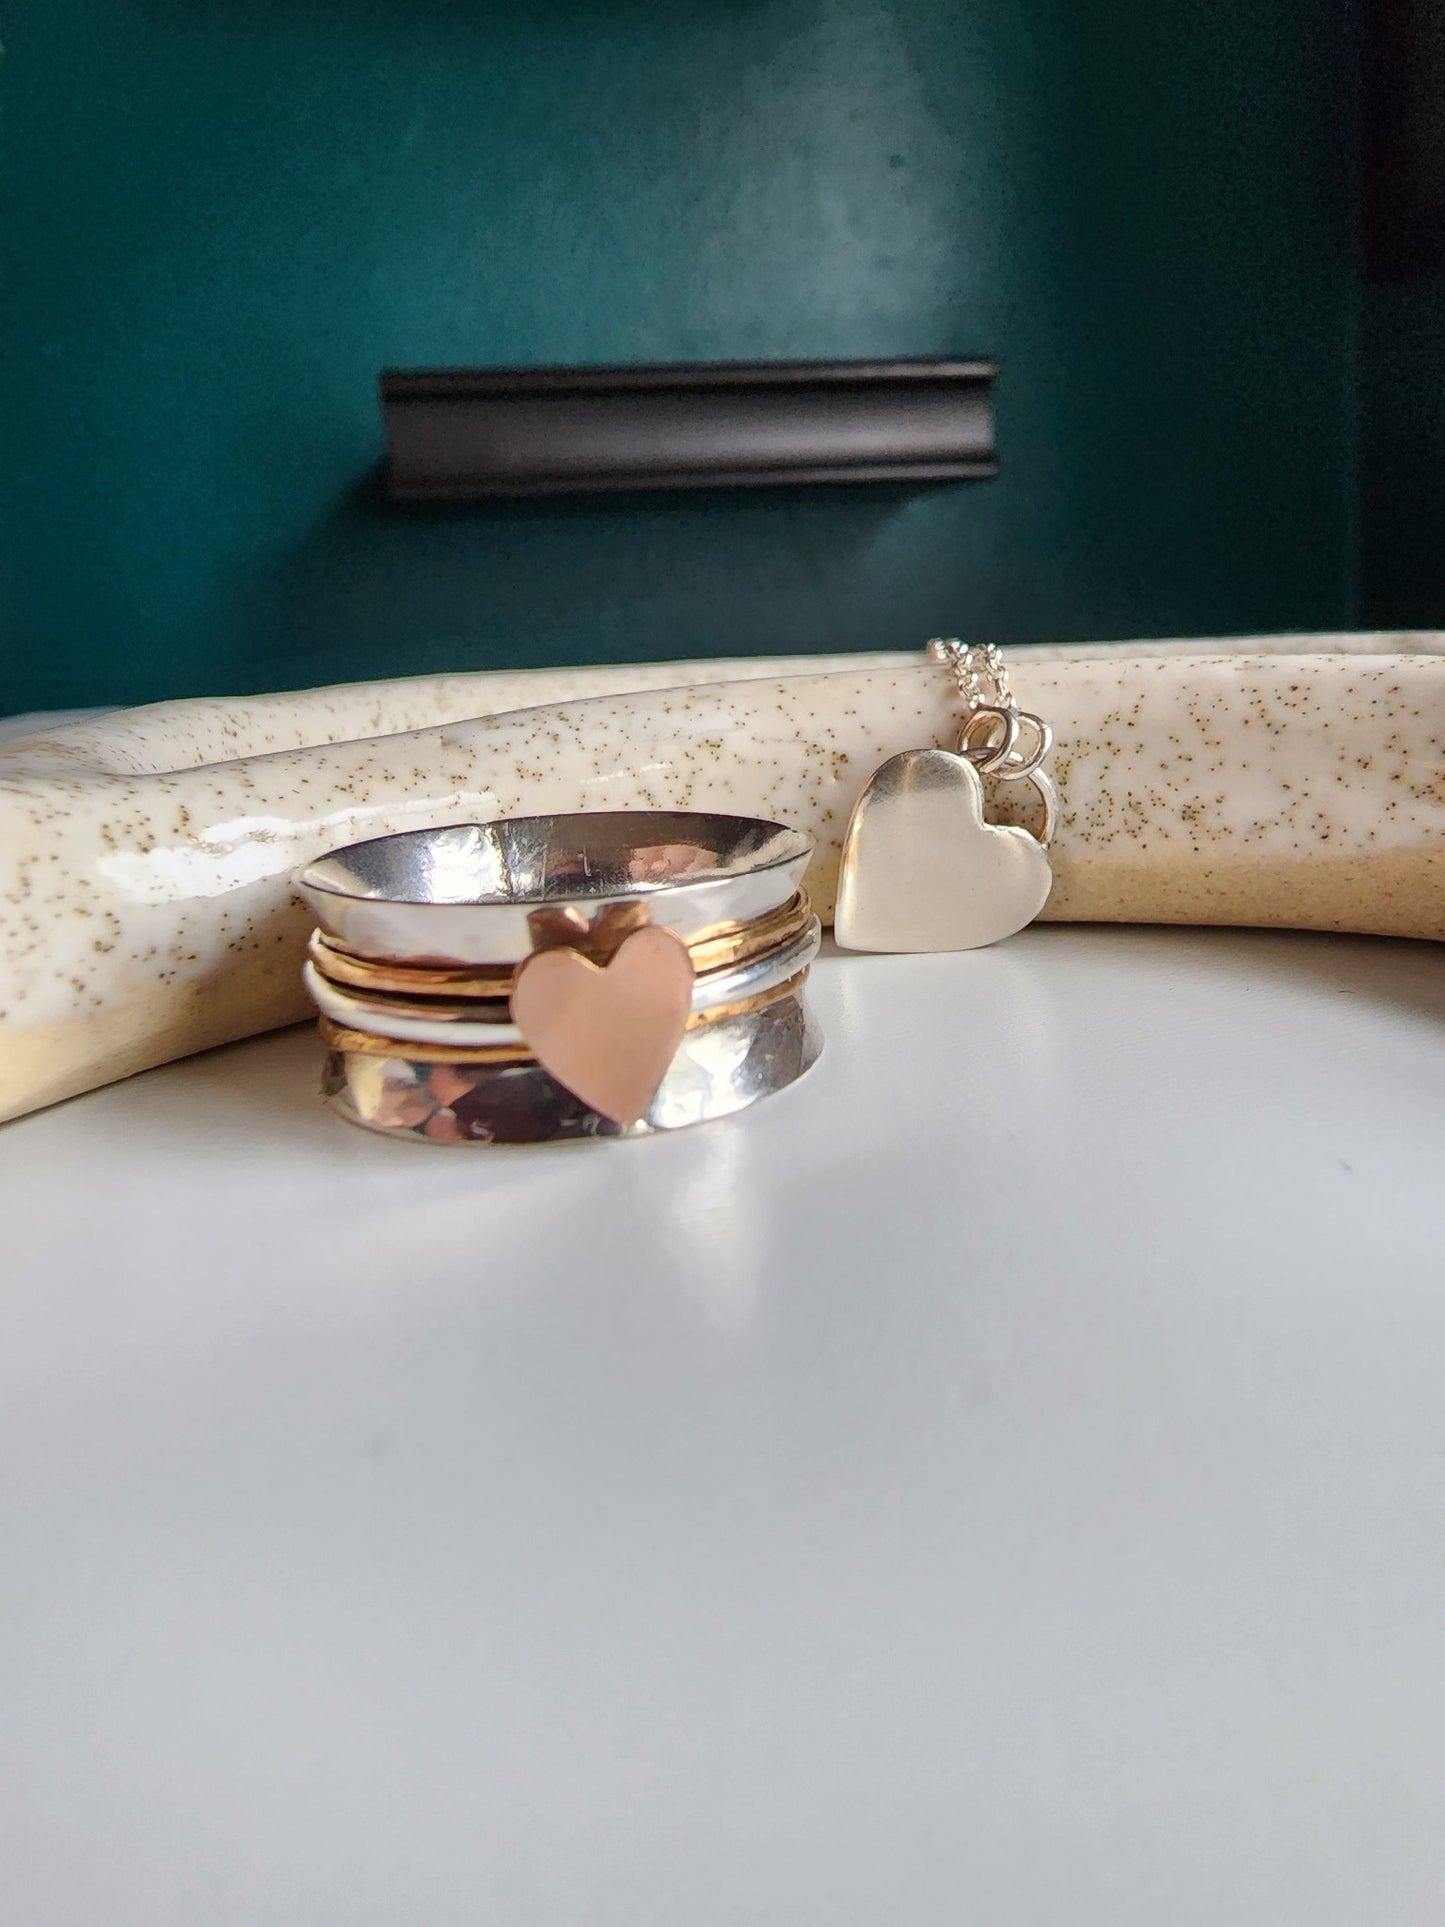 Silver textured wide band ring with three bands top band gold, middle band silver with a rose gold heart, bottom band is gold. Three bands mounted on a wide ring that spin freely, perfect for spinning of rings